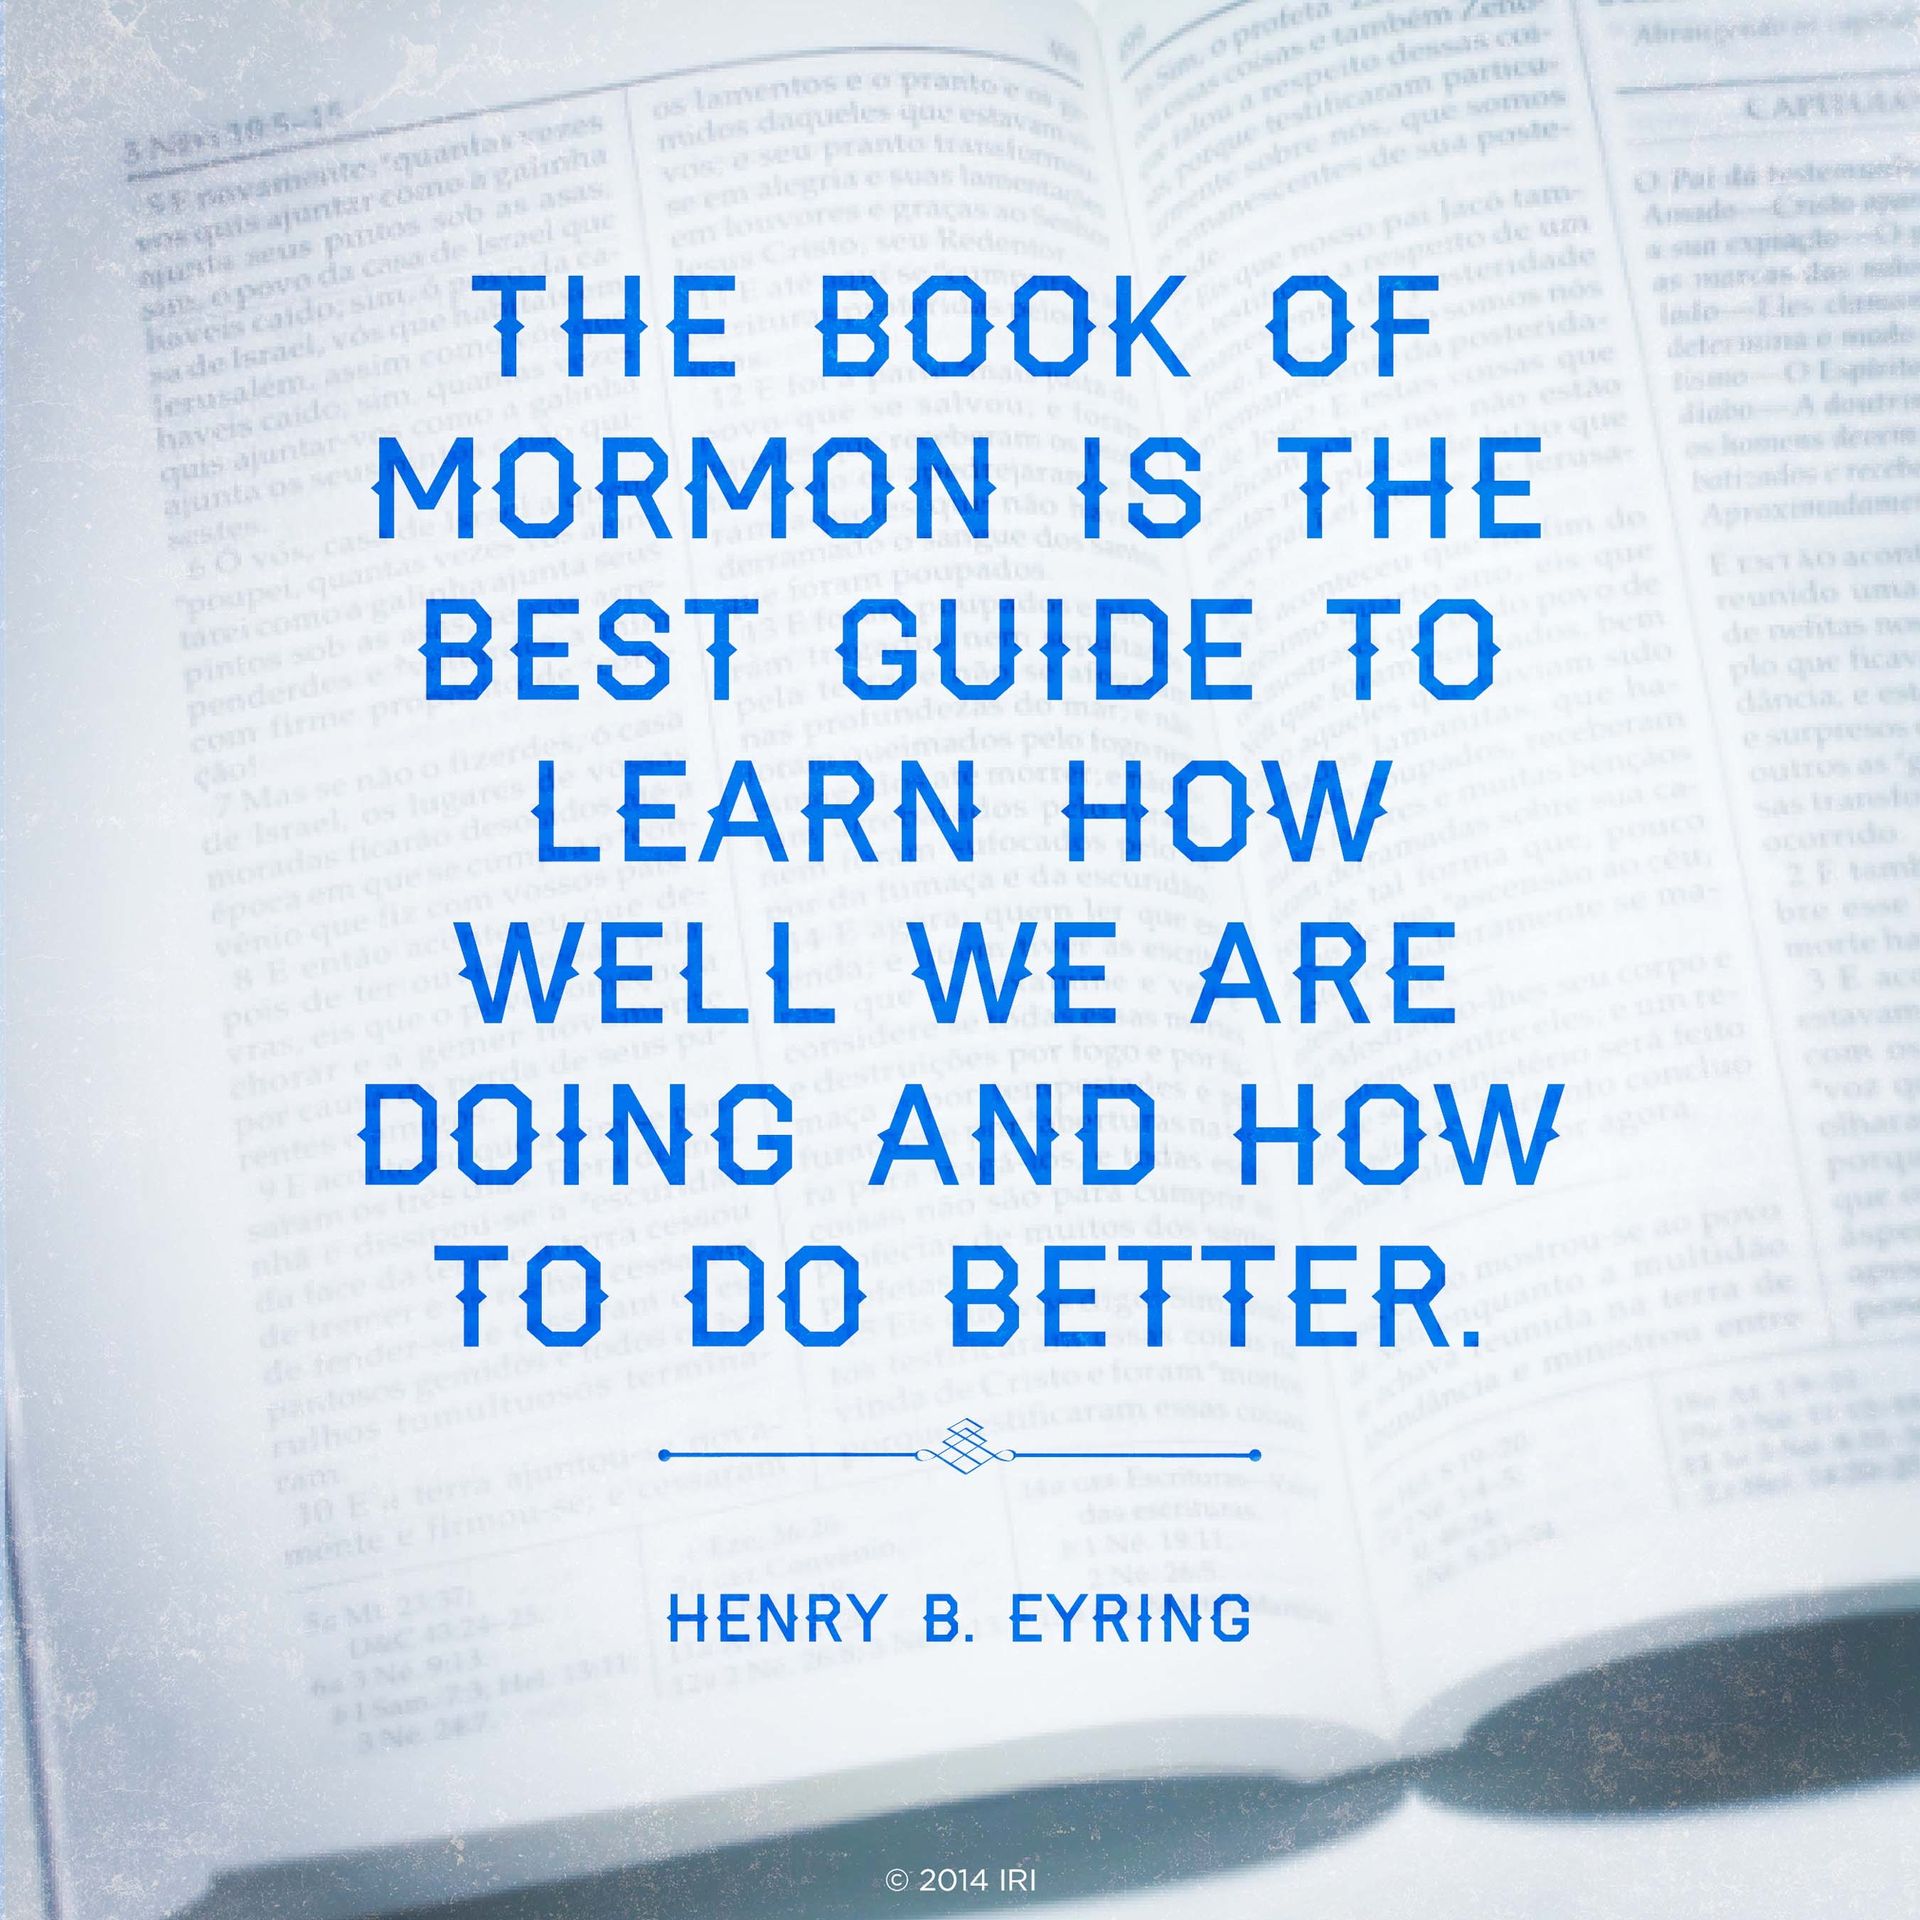 “The Book of Mormon is the best guide to learn how well we are doing and how to do better.”—President Henry B. Eyring, “A Witness”